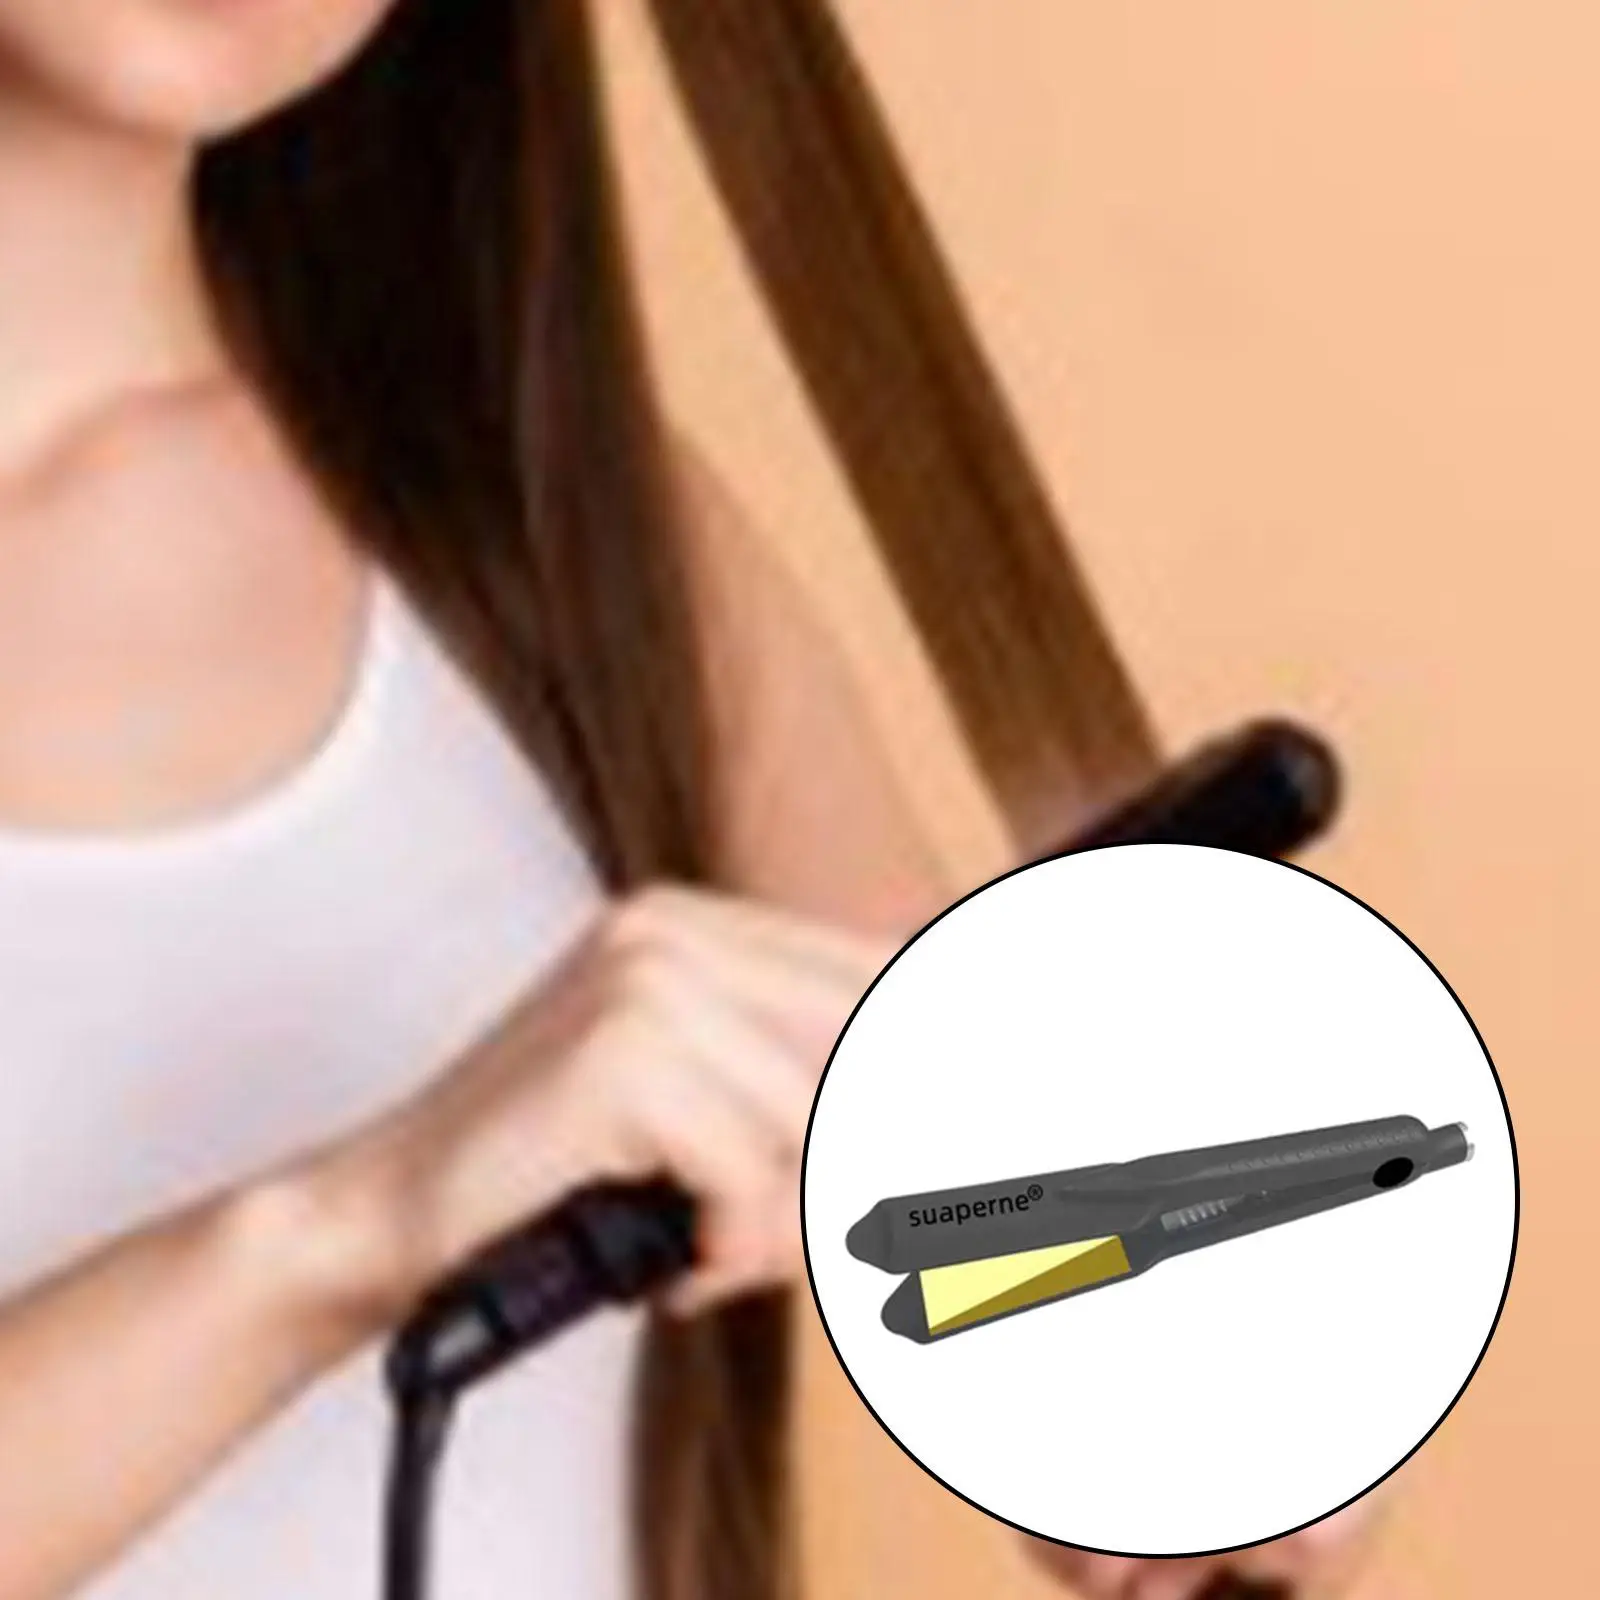 Hair Straightener Curler Curling Iron Flat Iron, Easy to Create Any Hairstyle,